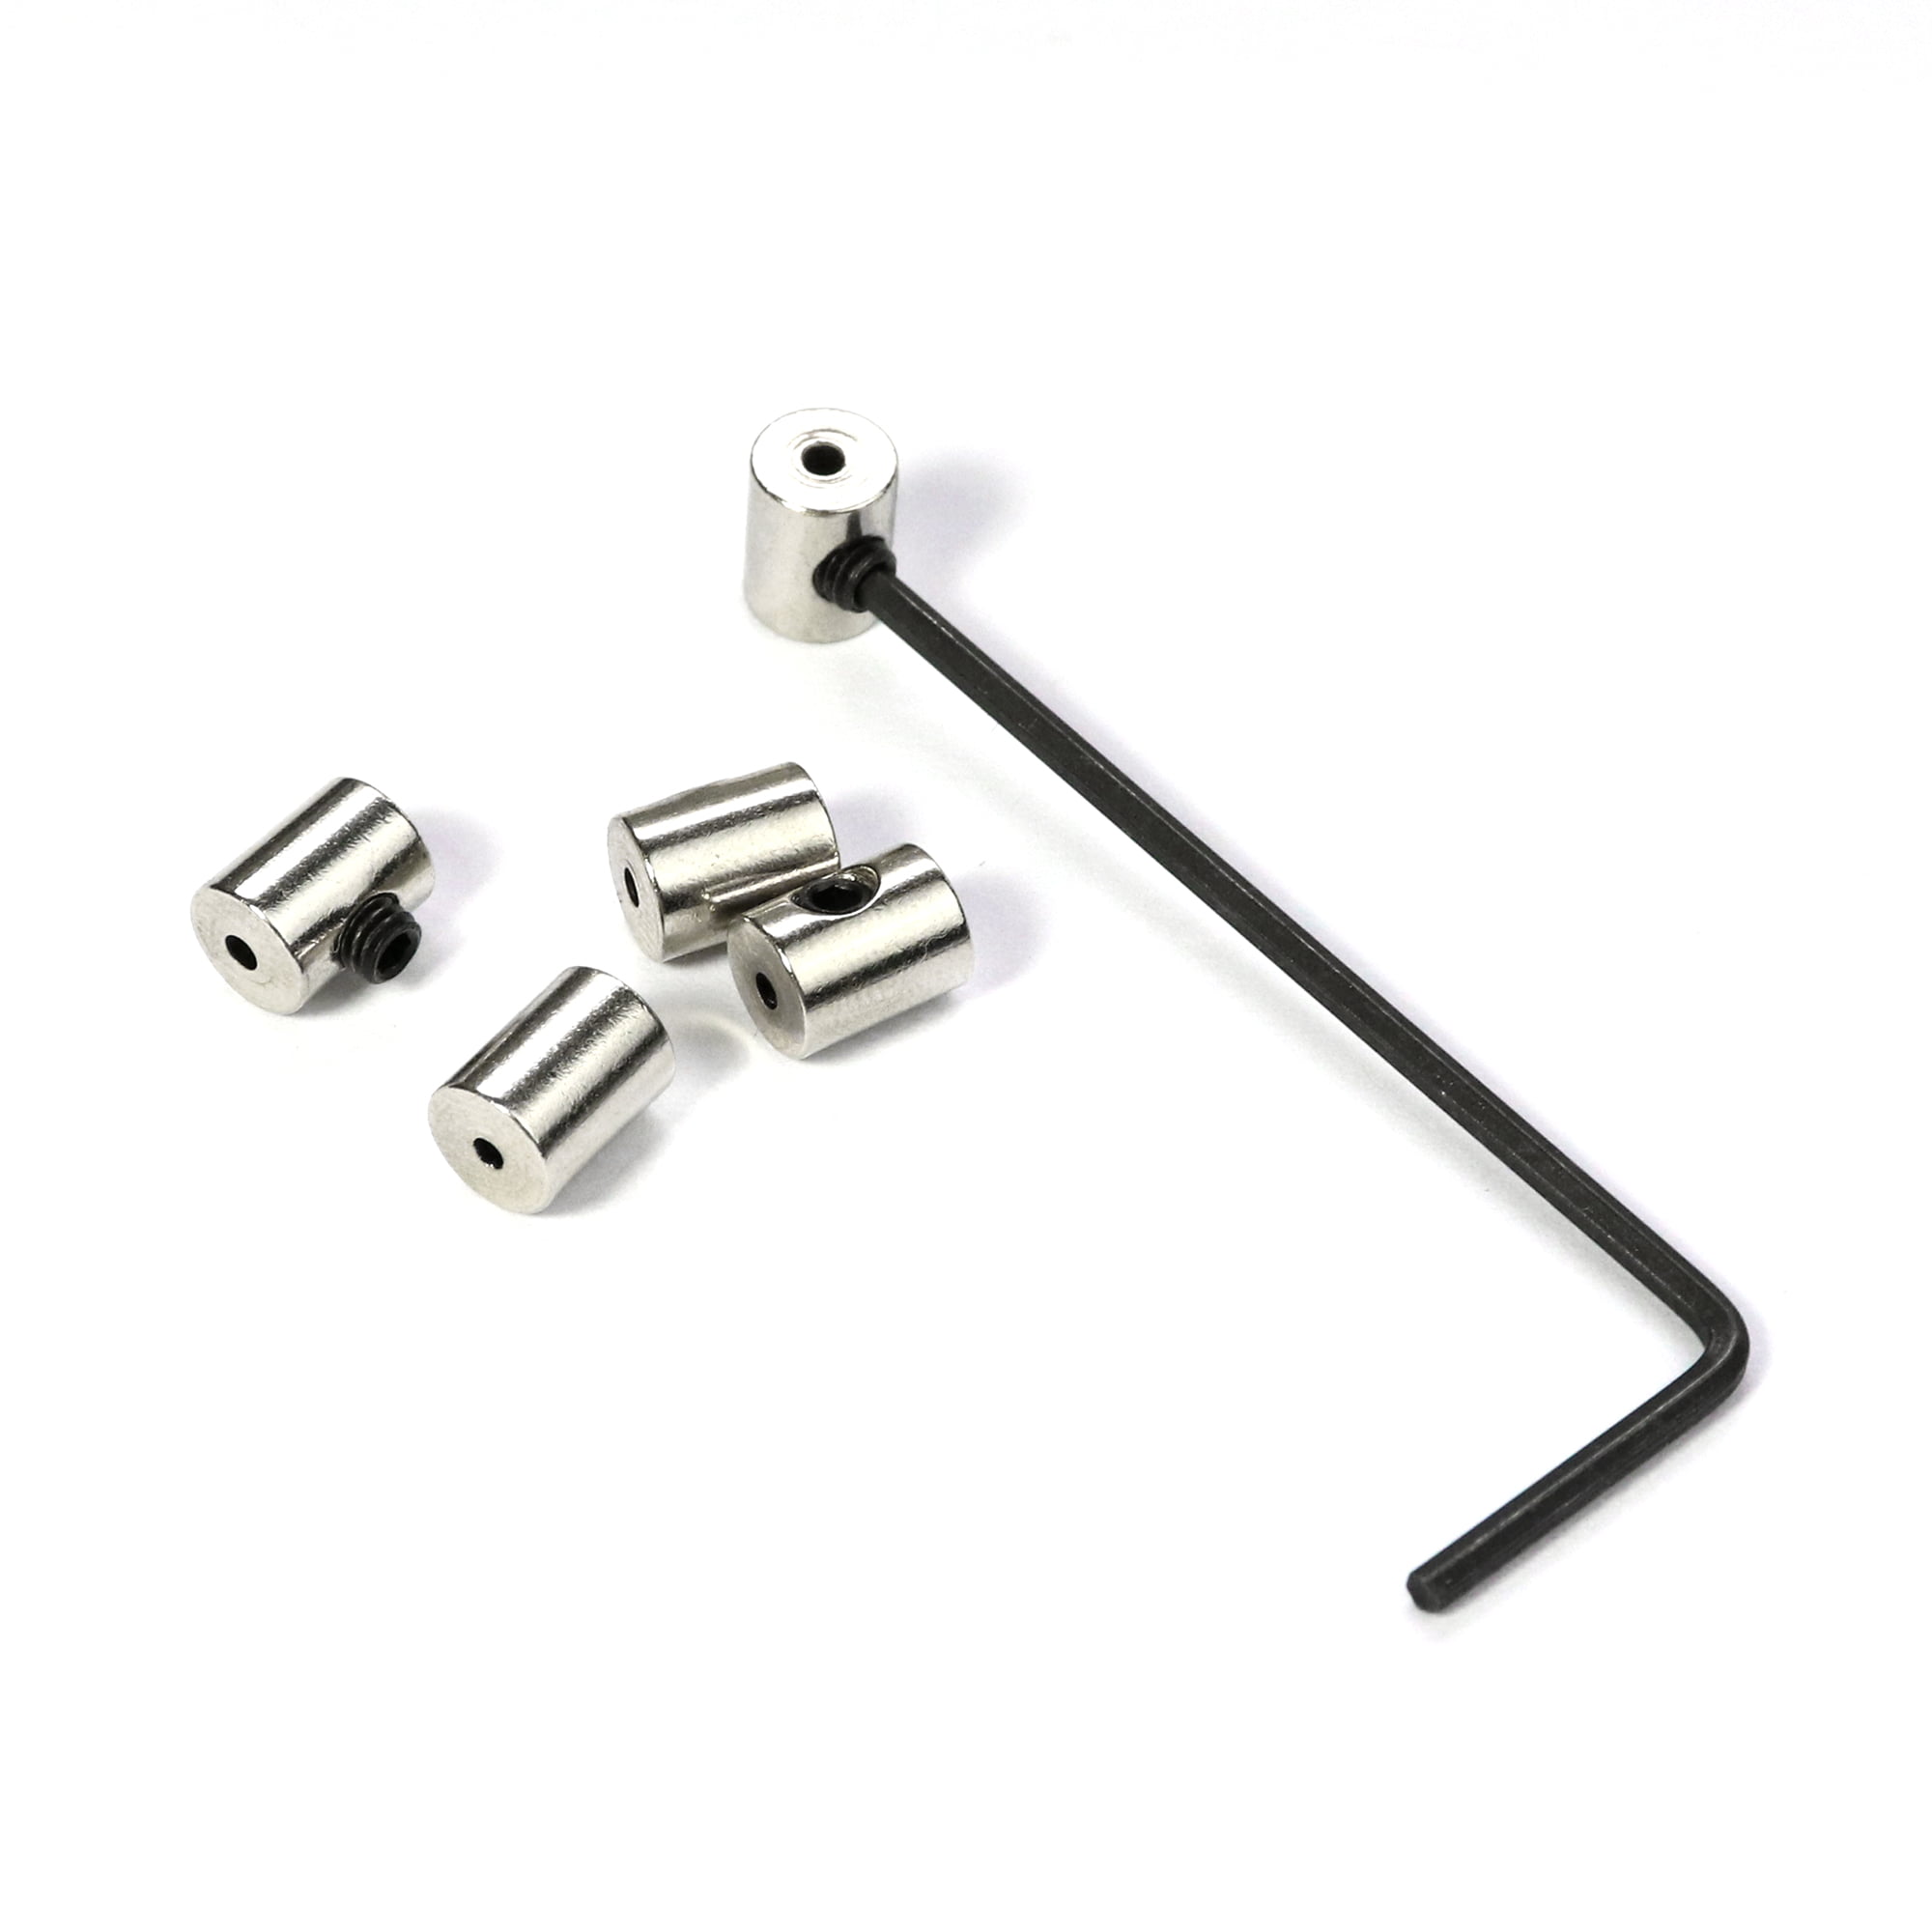 24x Durable Metal Pin Backs Locking Pin Keepers Clasp Replacement Backings  for Insignia, Brooch, Enamel Pins, Uniform Badges, Jewelry Accessories